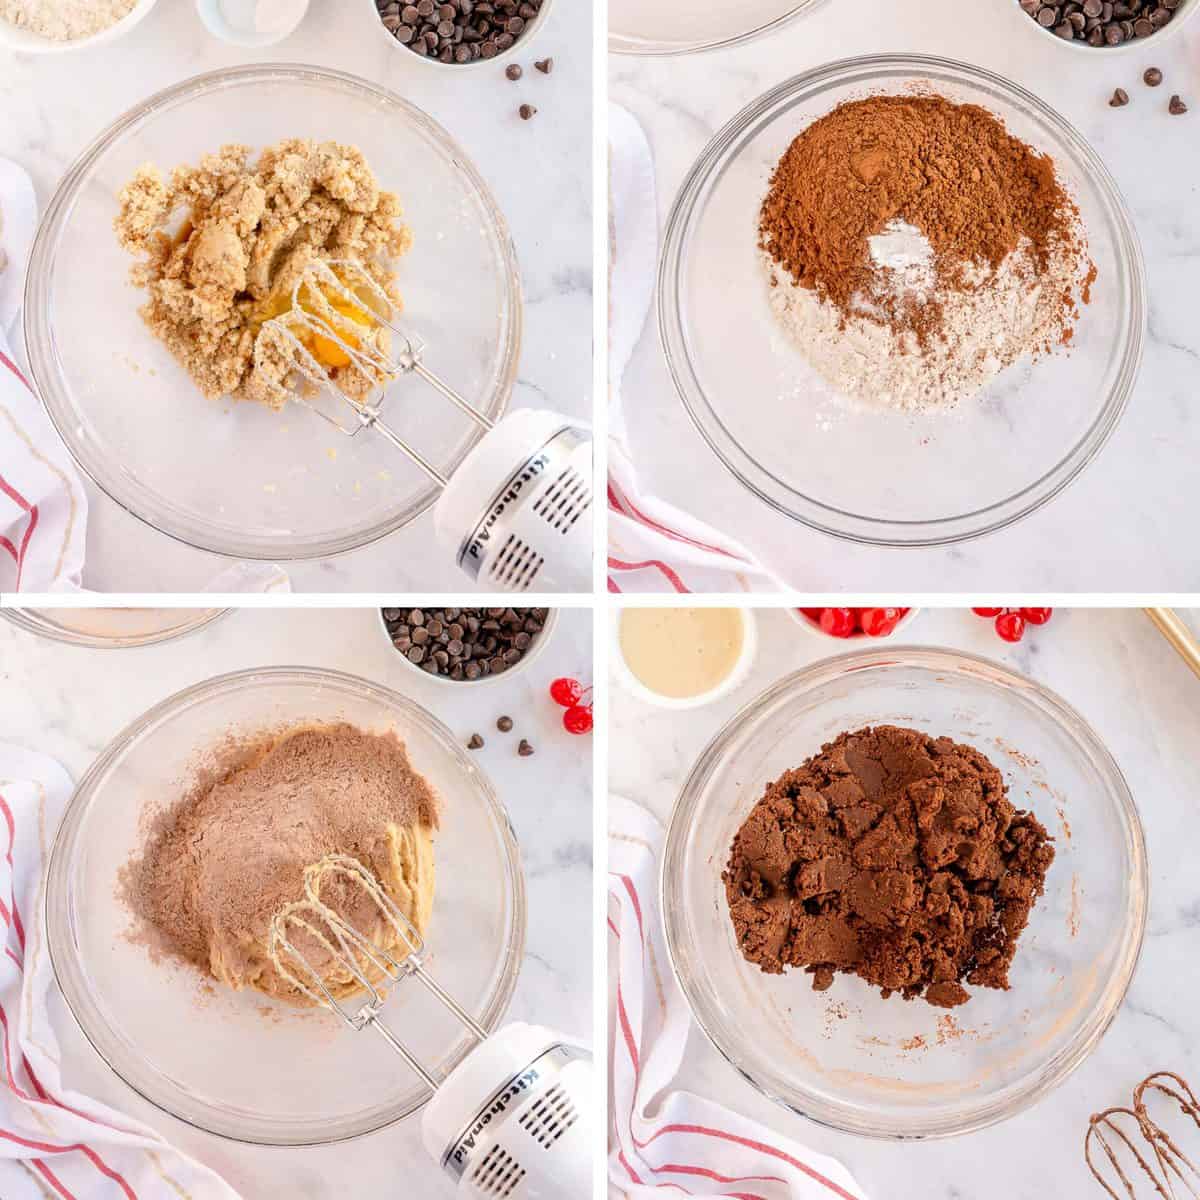 Ingredients are mixed in a bowl to make chocolate cookie dough.